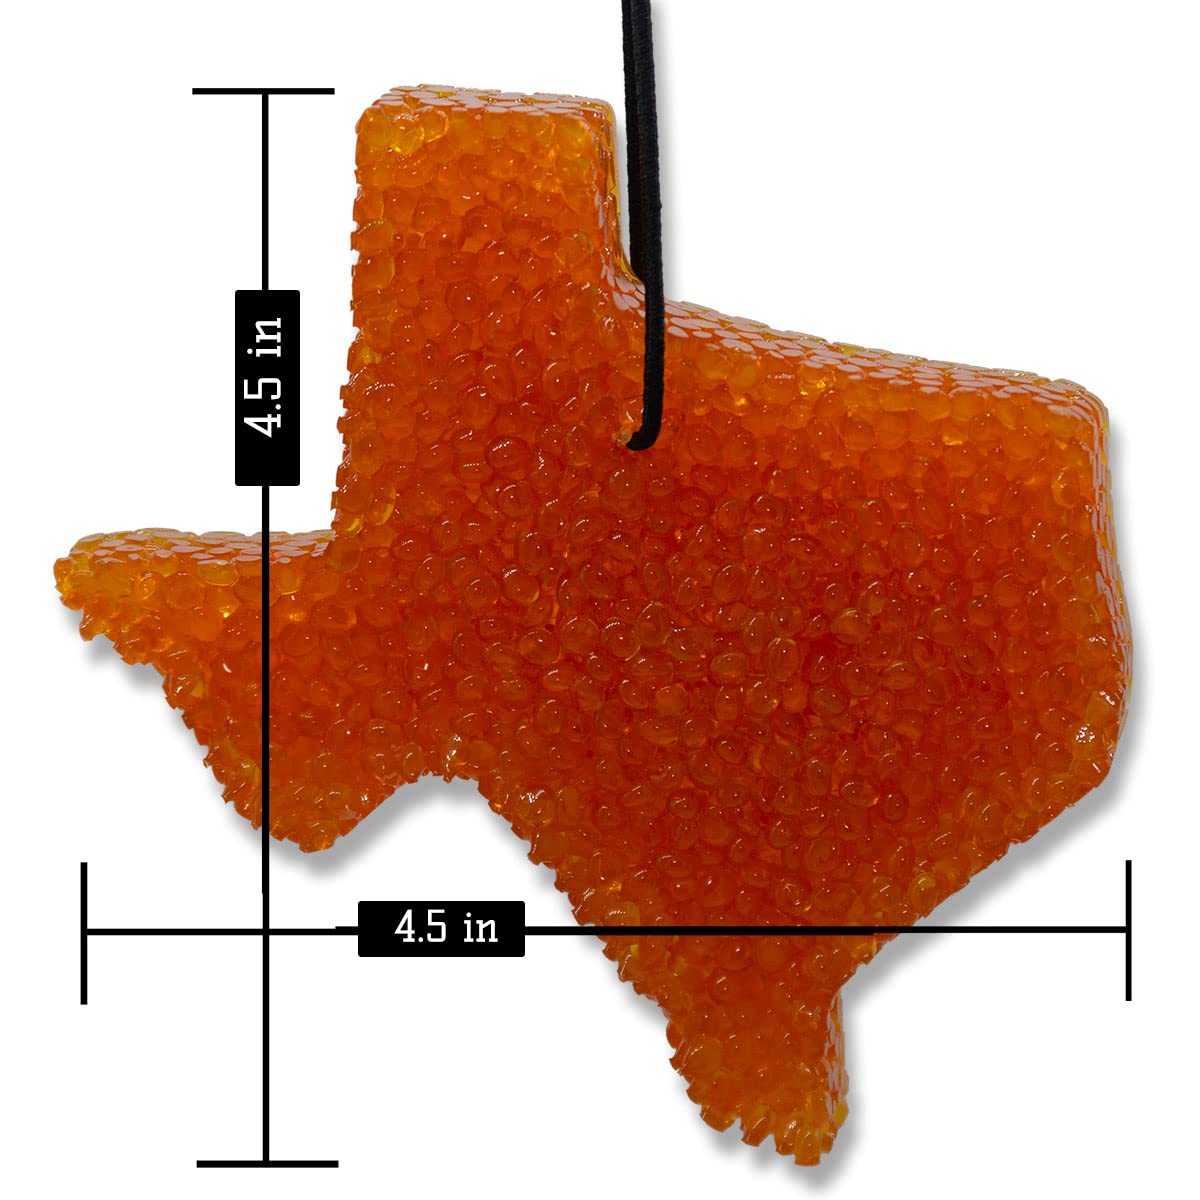 Leather and Lace, Lone Star Candles and More’s Original Aroma of Genuine Leather and Creamy Vanilla, Car & Air Freshener, USA Made in Texas, Orange Texas State 1-Pack